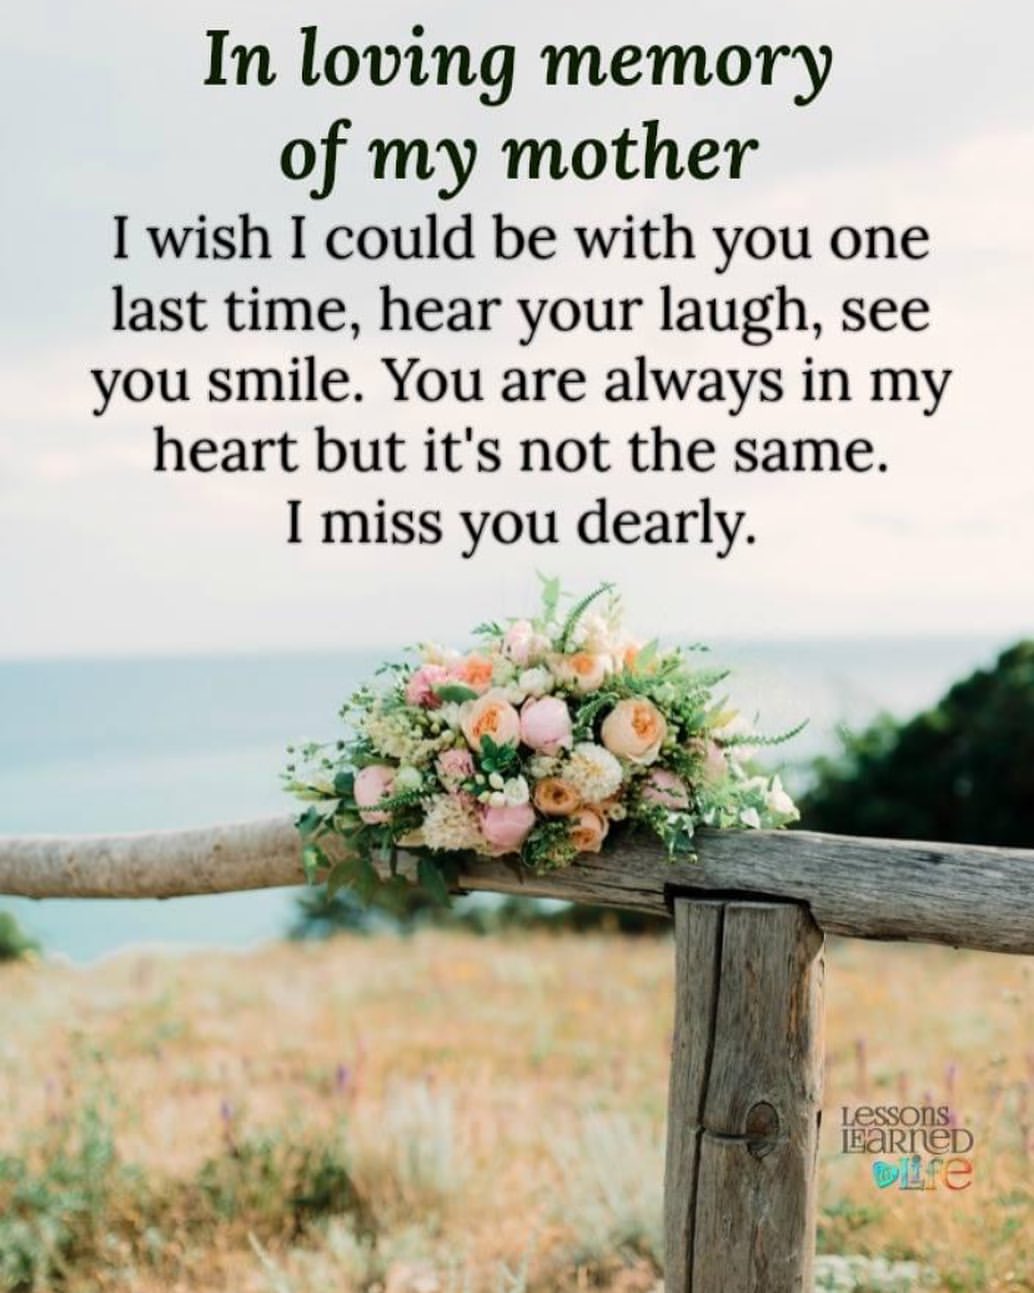 In loving memory of my mother I wish I could be with you one last time, hear your laugh, see you smile. You are always in my heart but it's not the same. I miss you dearly.